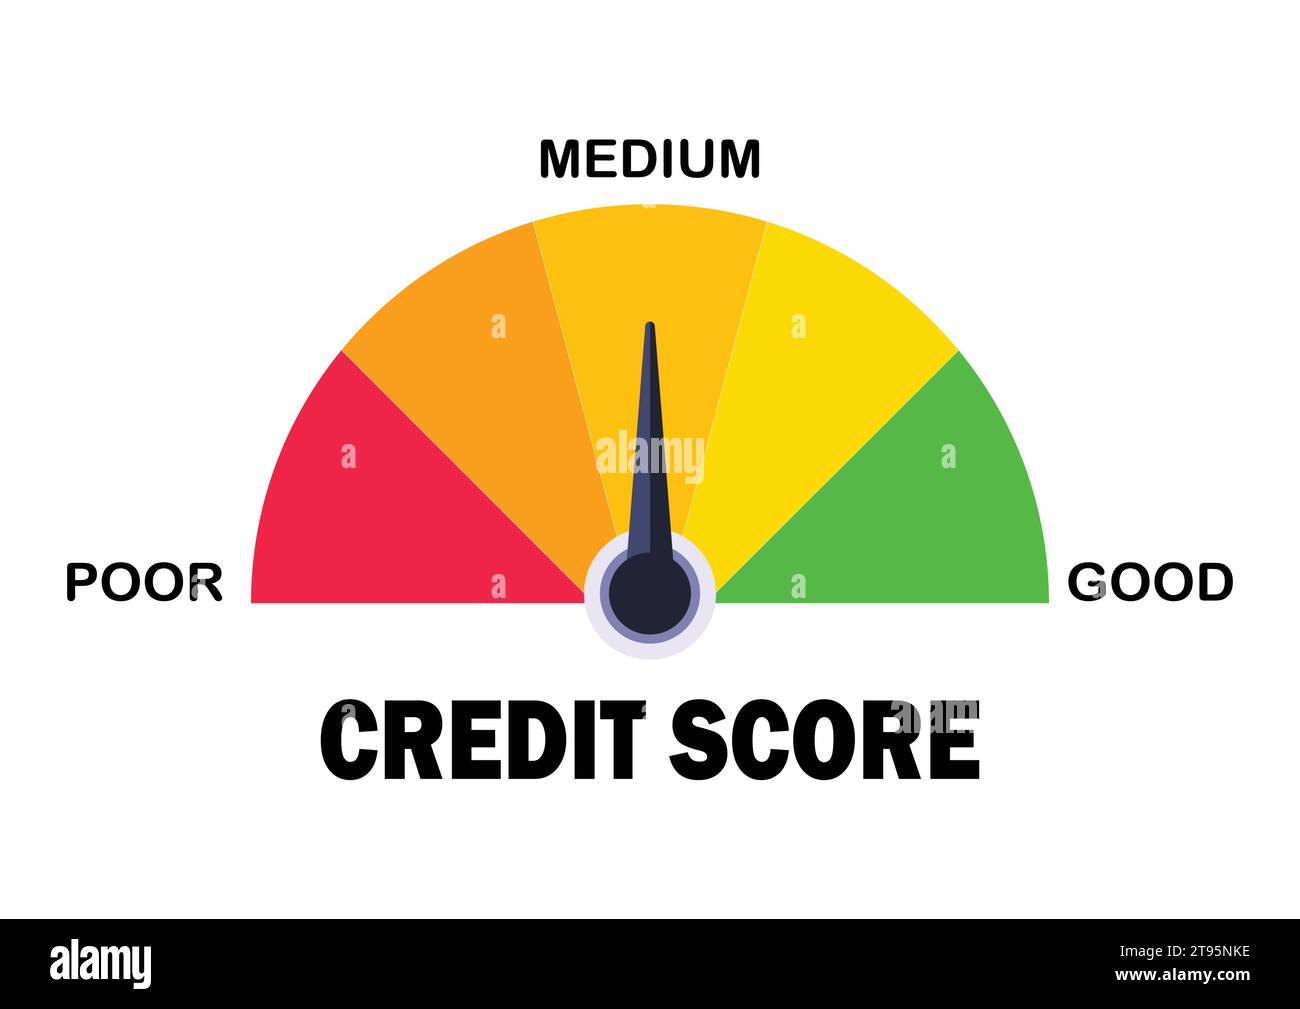 https://c8.alamy.com/comp/2T95NKE/credit-score-meter-icon-isolated-on-white-background-loan-rating-scale-with-levels-from-poor-to-good-financial-capacity-assessment-vector-flat-2T95NKE.jpg